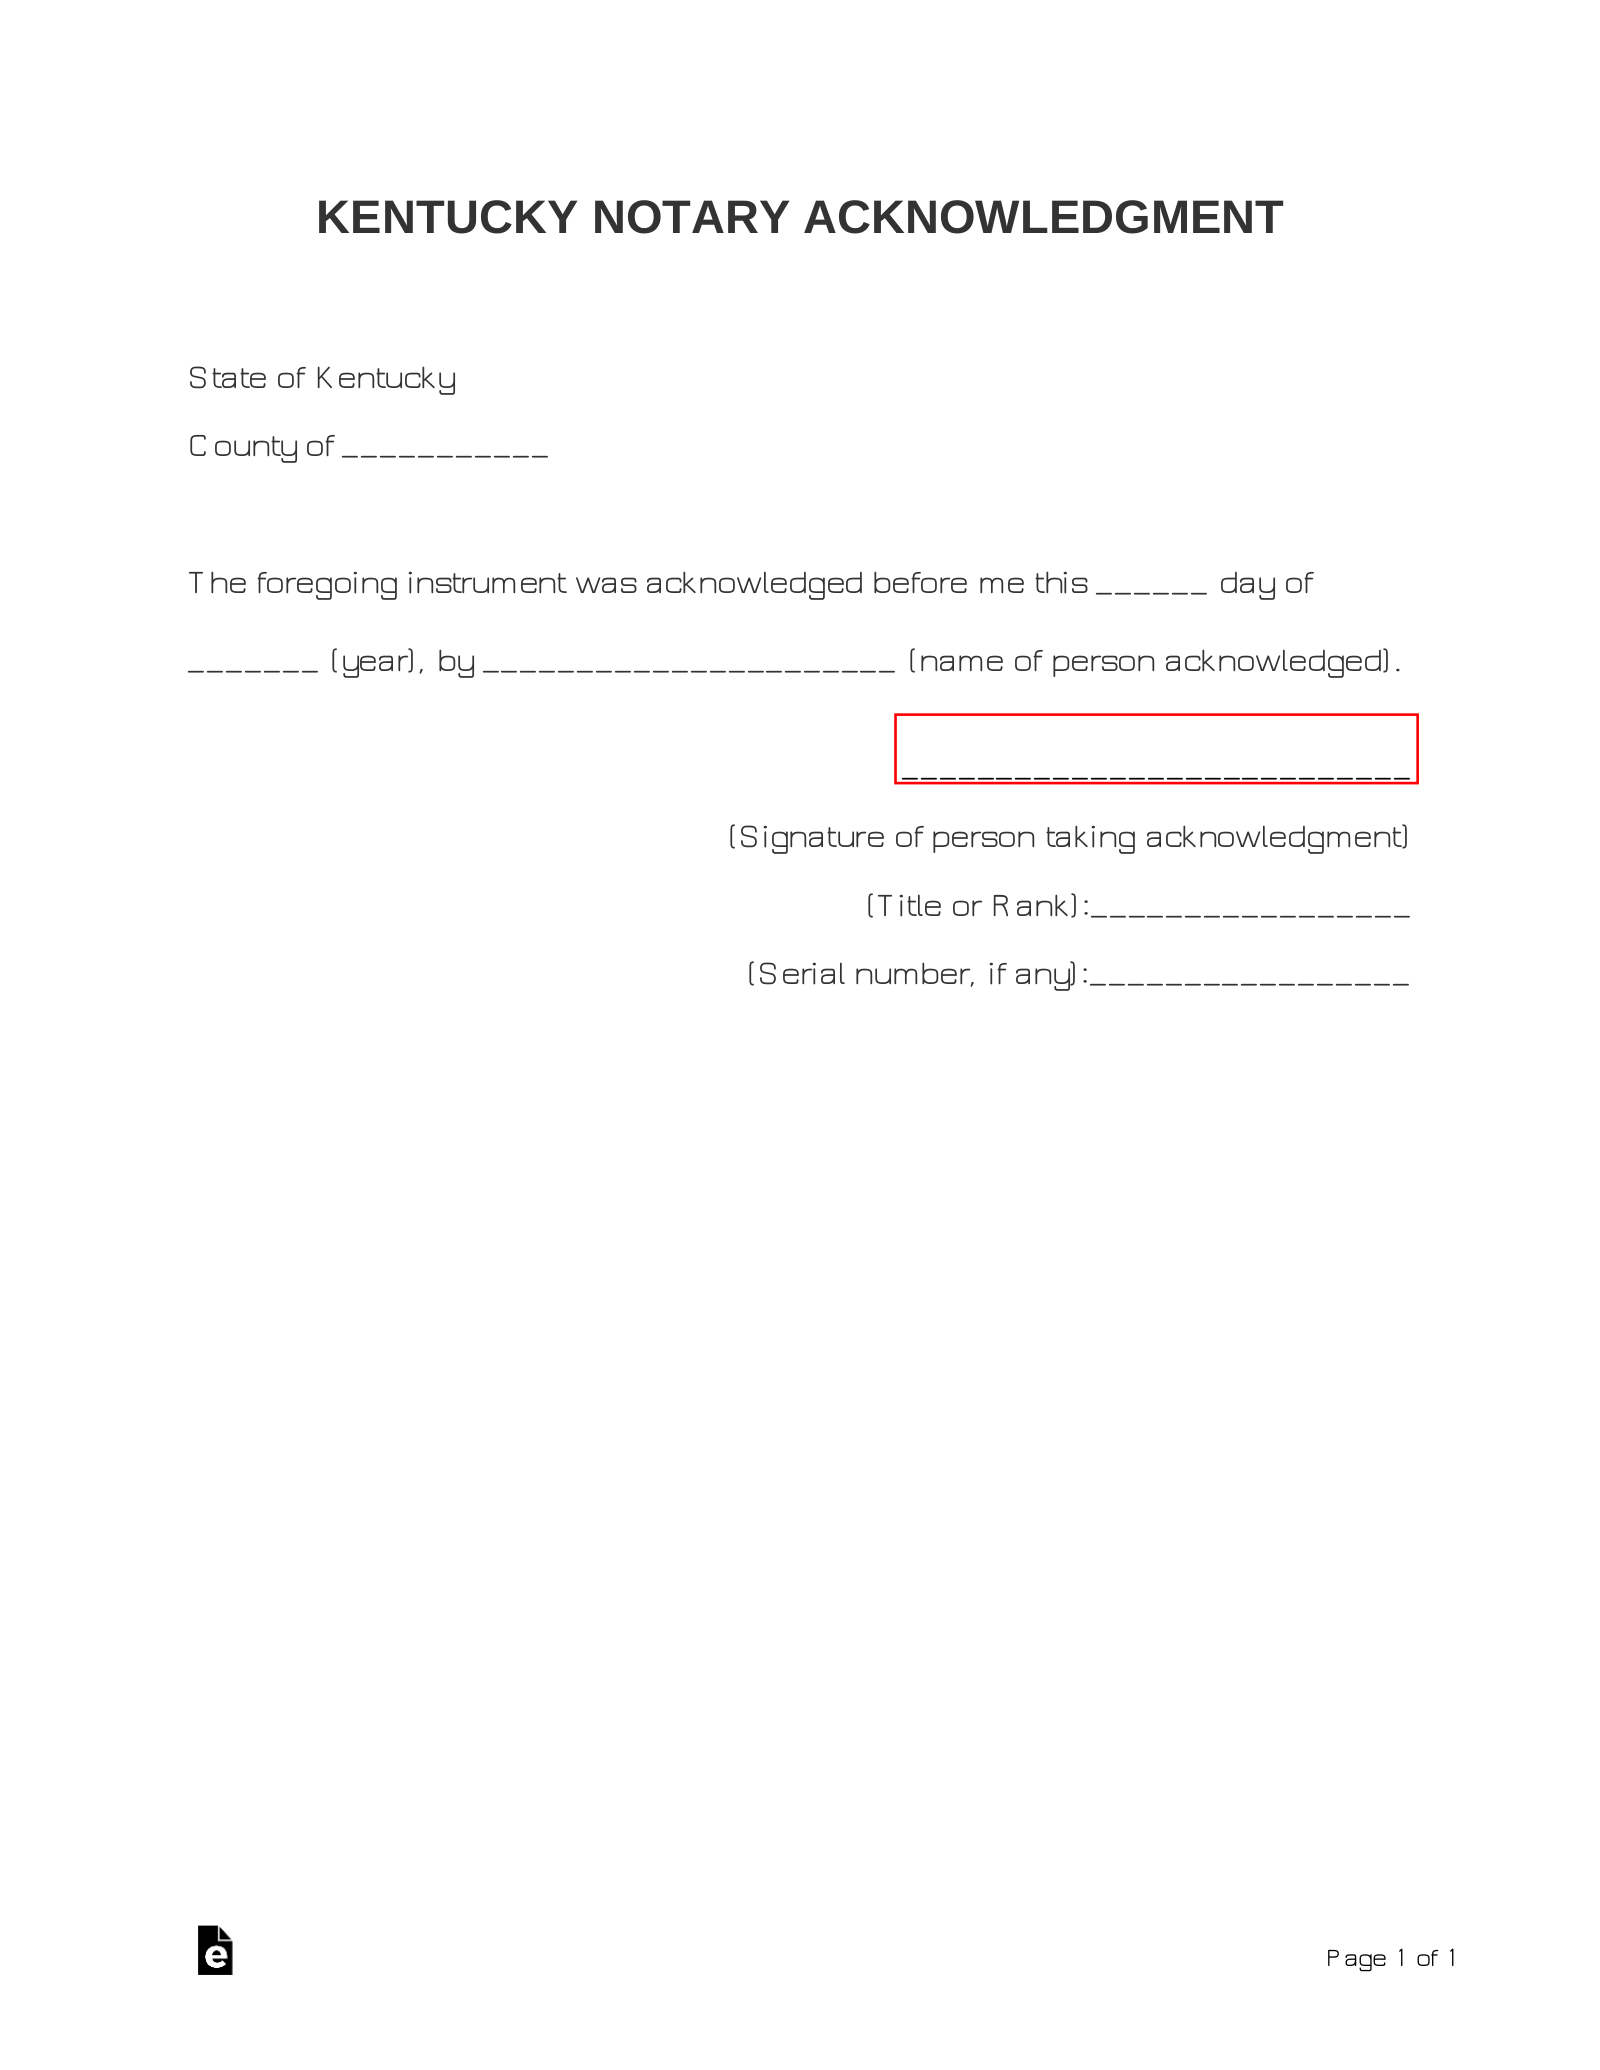 Kentucky Notary Acknowledgment Form